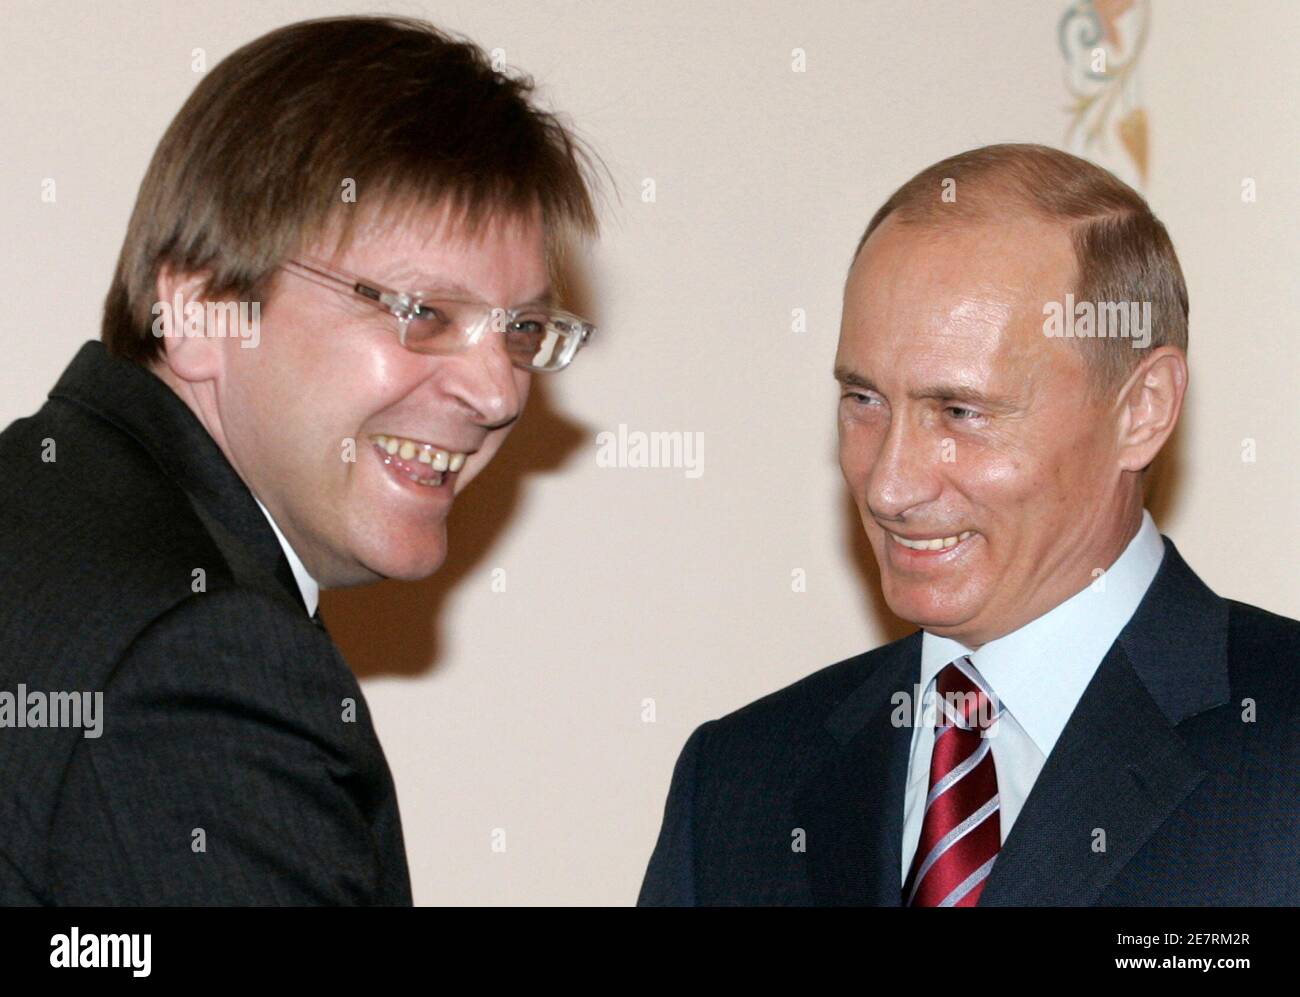 Belgian Prime Minister Guy Verhofstadt (L) meets Russian President Vladimir Putin in the presidential residence of Novo-Ogaryovo outside Moscow March 2, 2007. REUTERS/Ivan Sekretarev/Pool (RUSSIA Stock Photo - Alamy